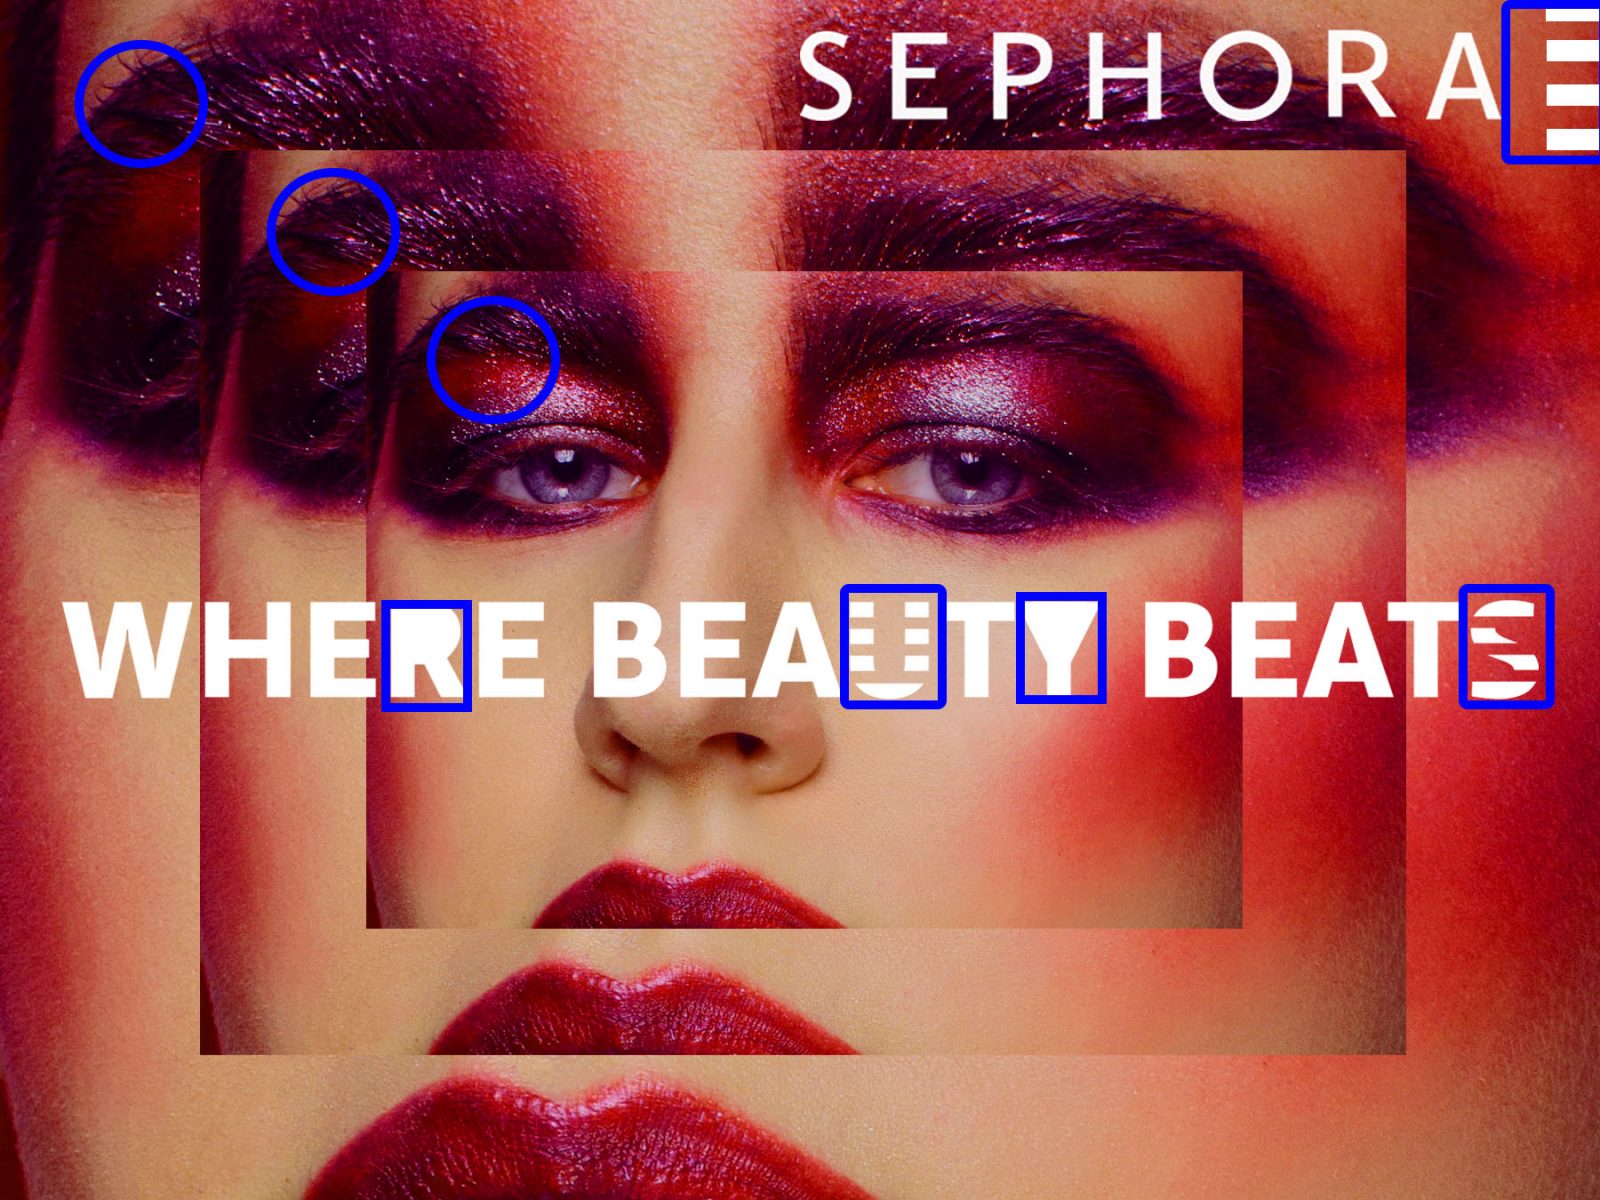 Sephora is threatening to pull out of J.C. Penney stores